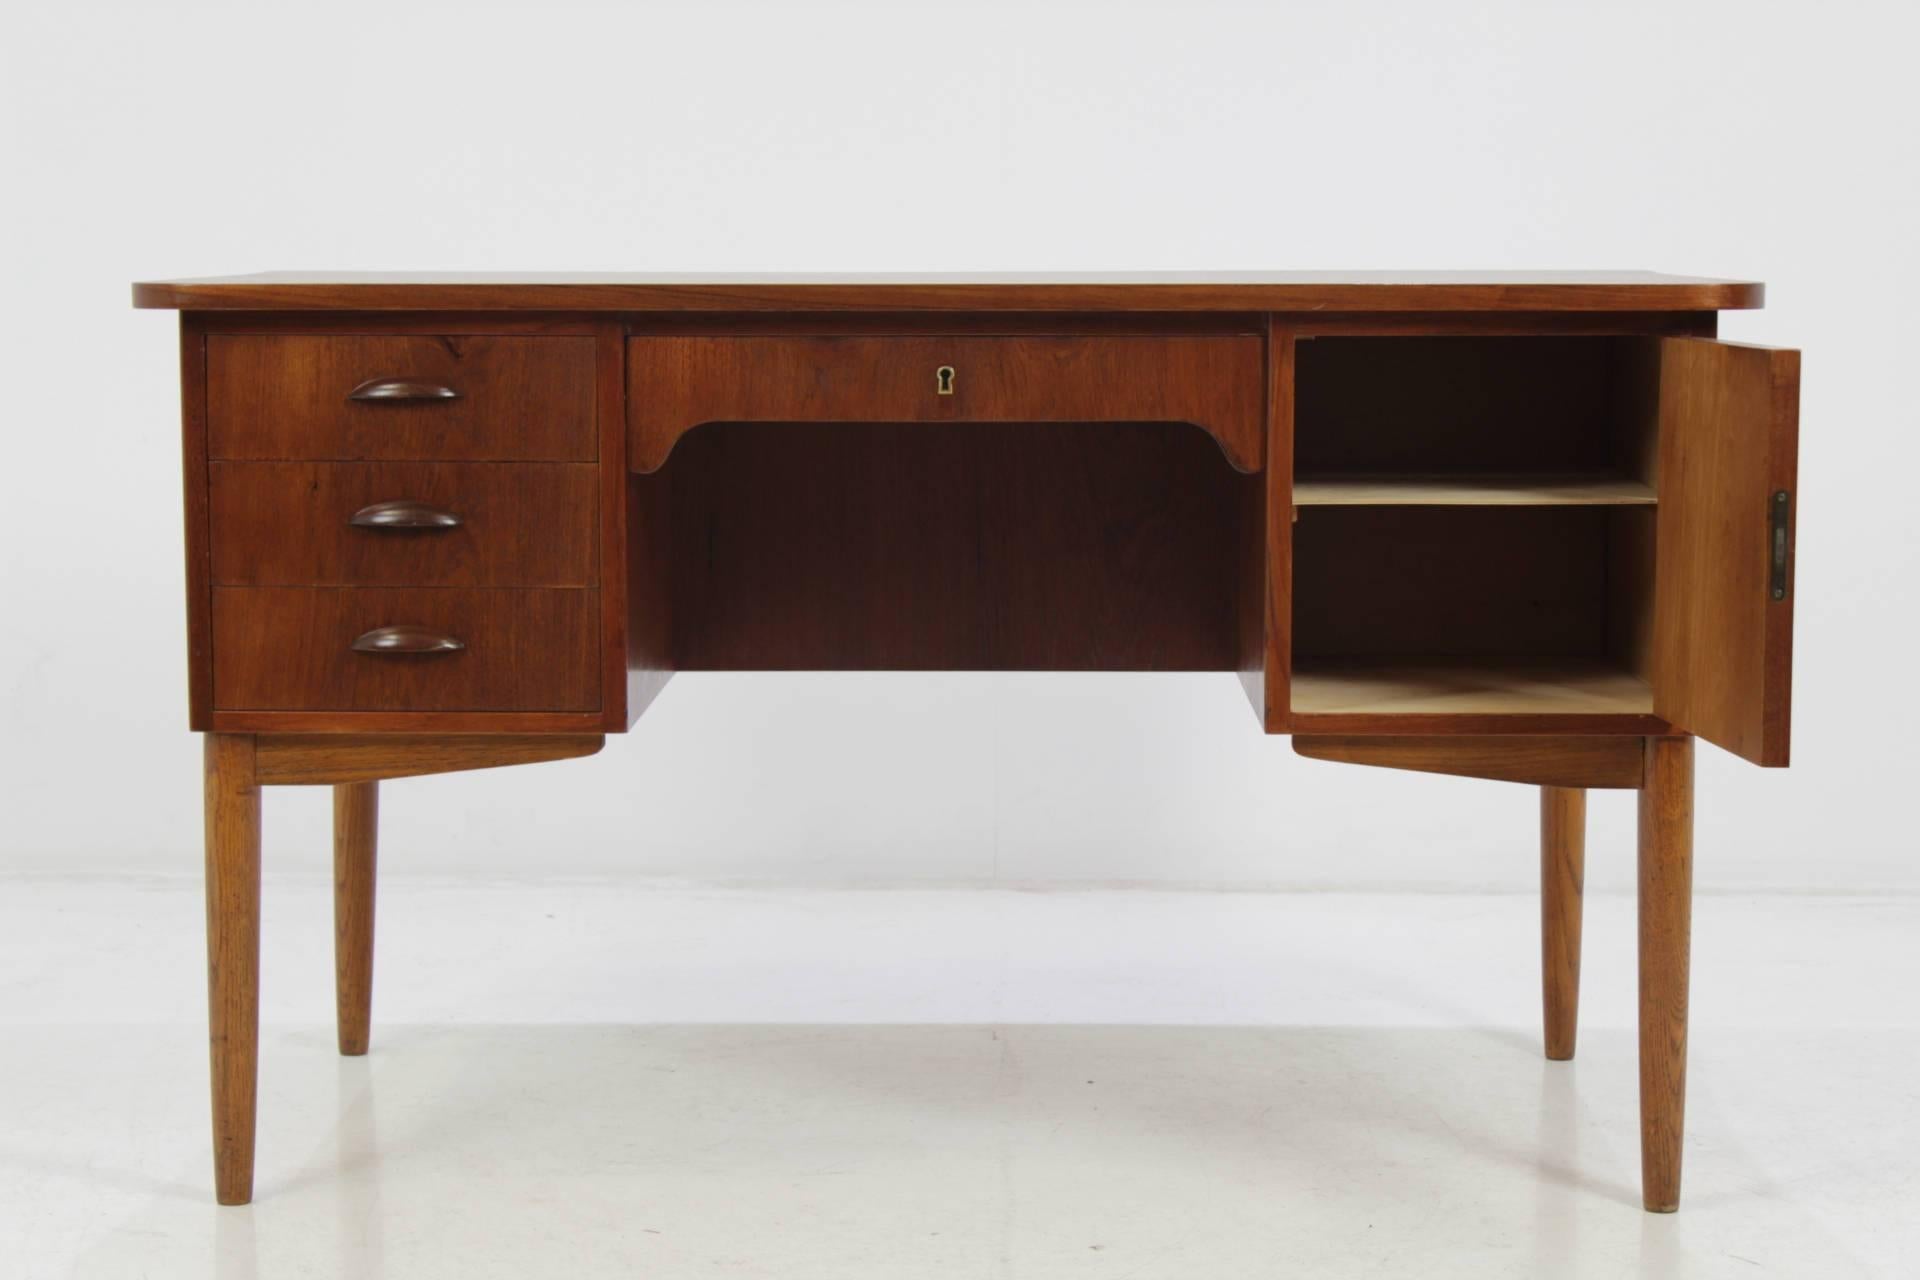 The desk features three drawers and one lockable compartment with door has open storage space on the back side . This item was carefully restored.